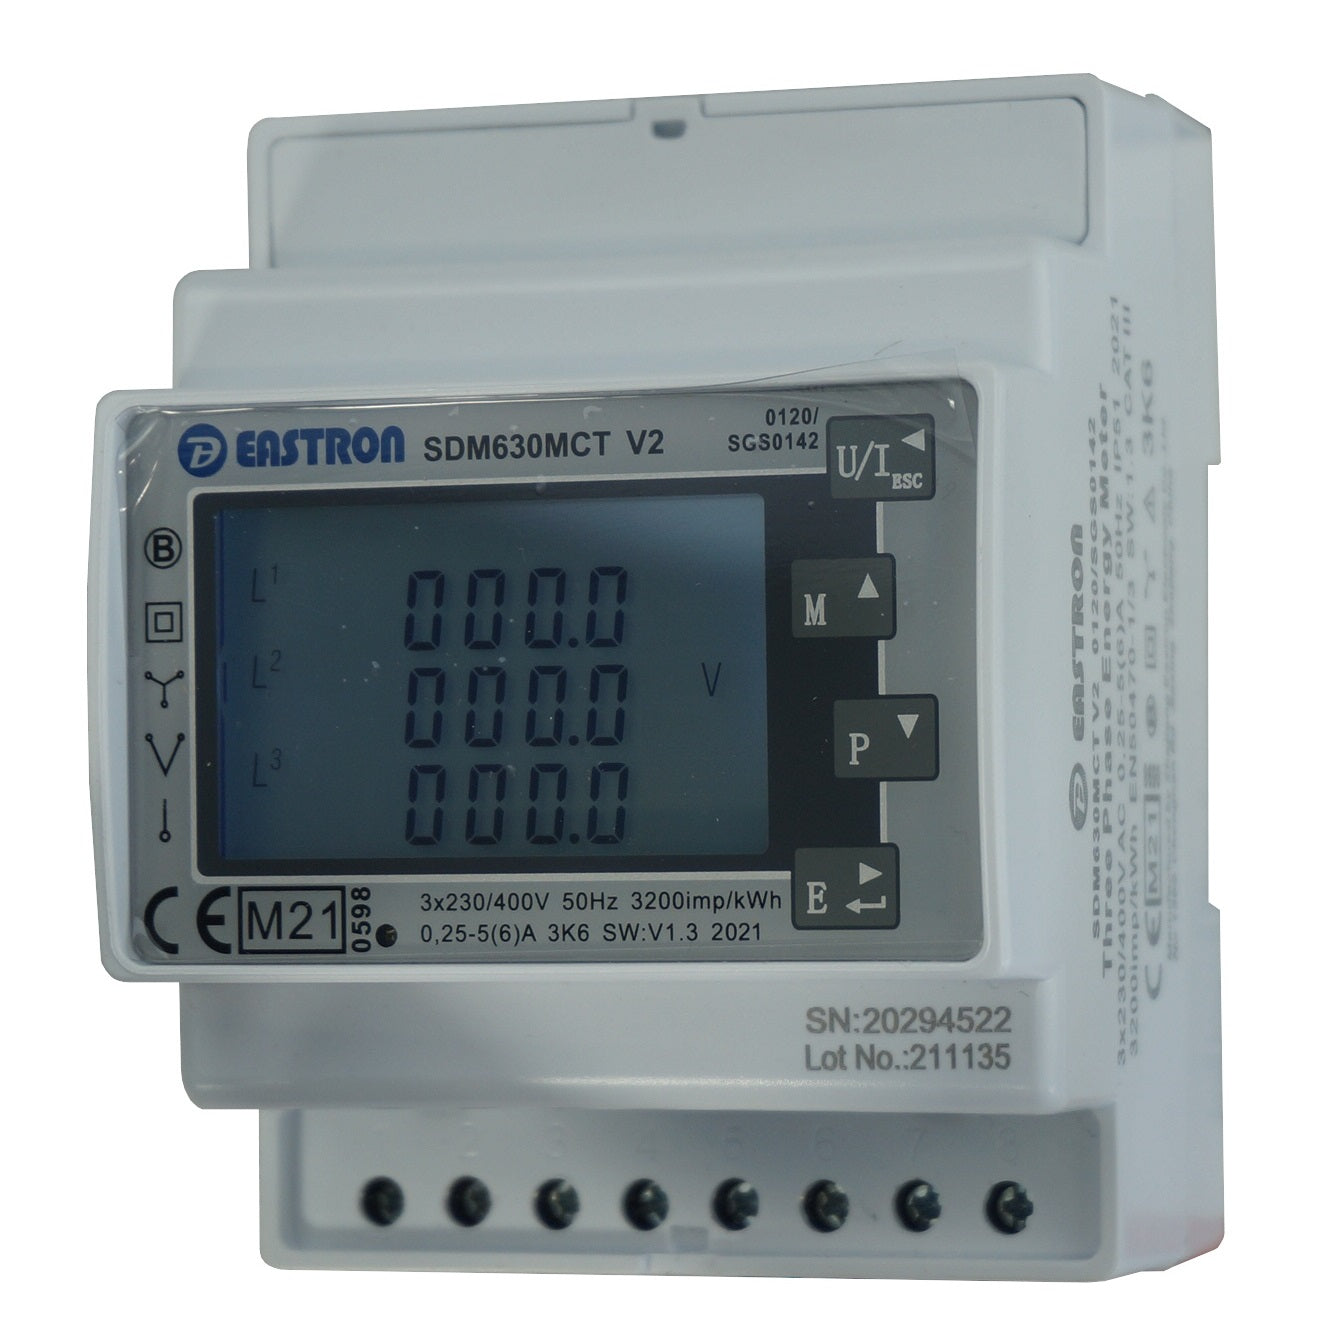 SDM630MCT-LORAWAN-MID-AU915, DIN Rail Mount kWh Meter, 3 Phase, 240VAC aux, Class 1, 1/5 Amp CT Connect, w/ 2 x pulse outputs and LoRaWaN AU915 Wireless Comms